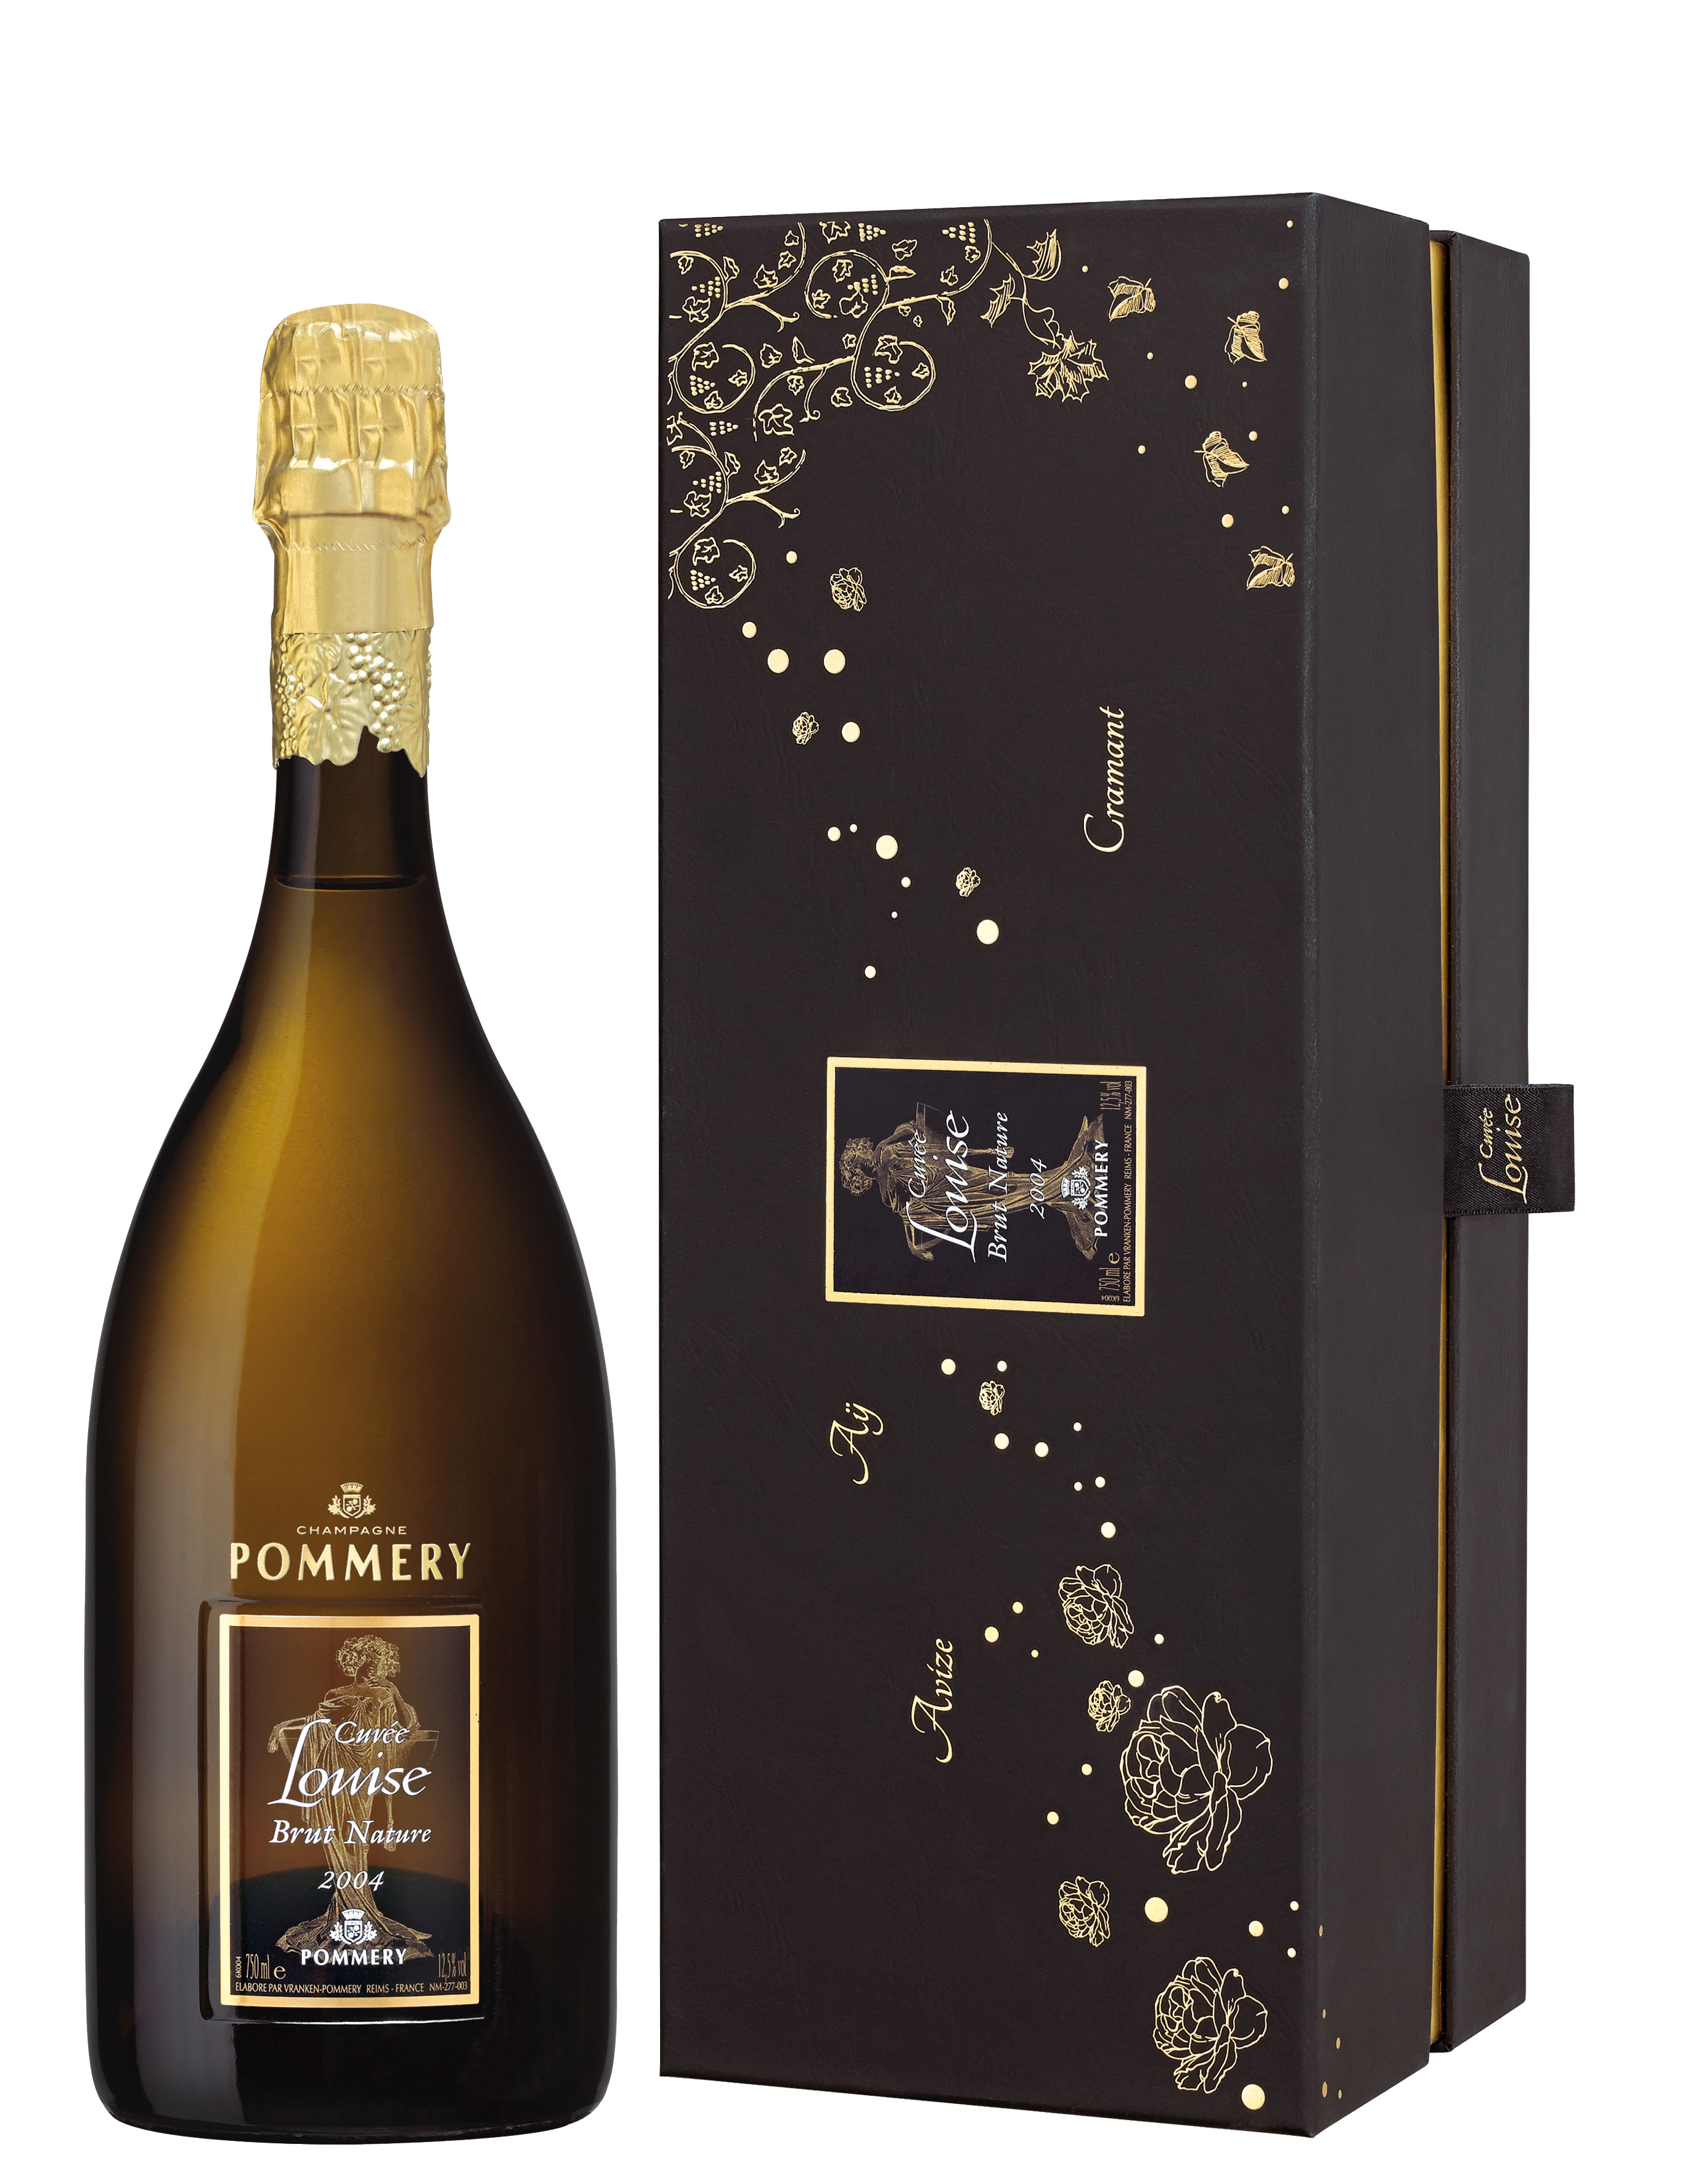 Pommery - Cuvee Louise Brut Nature label